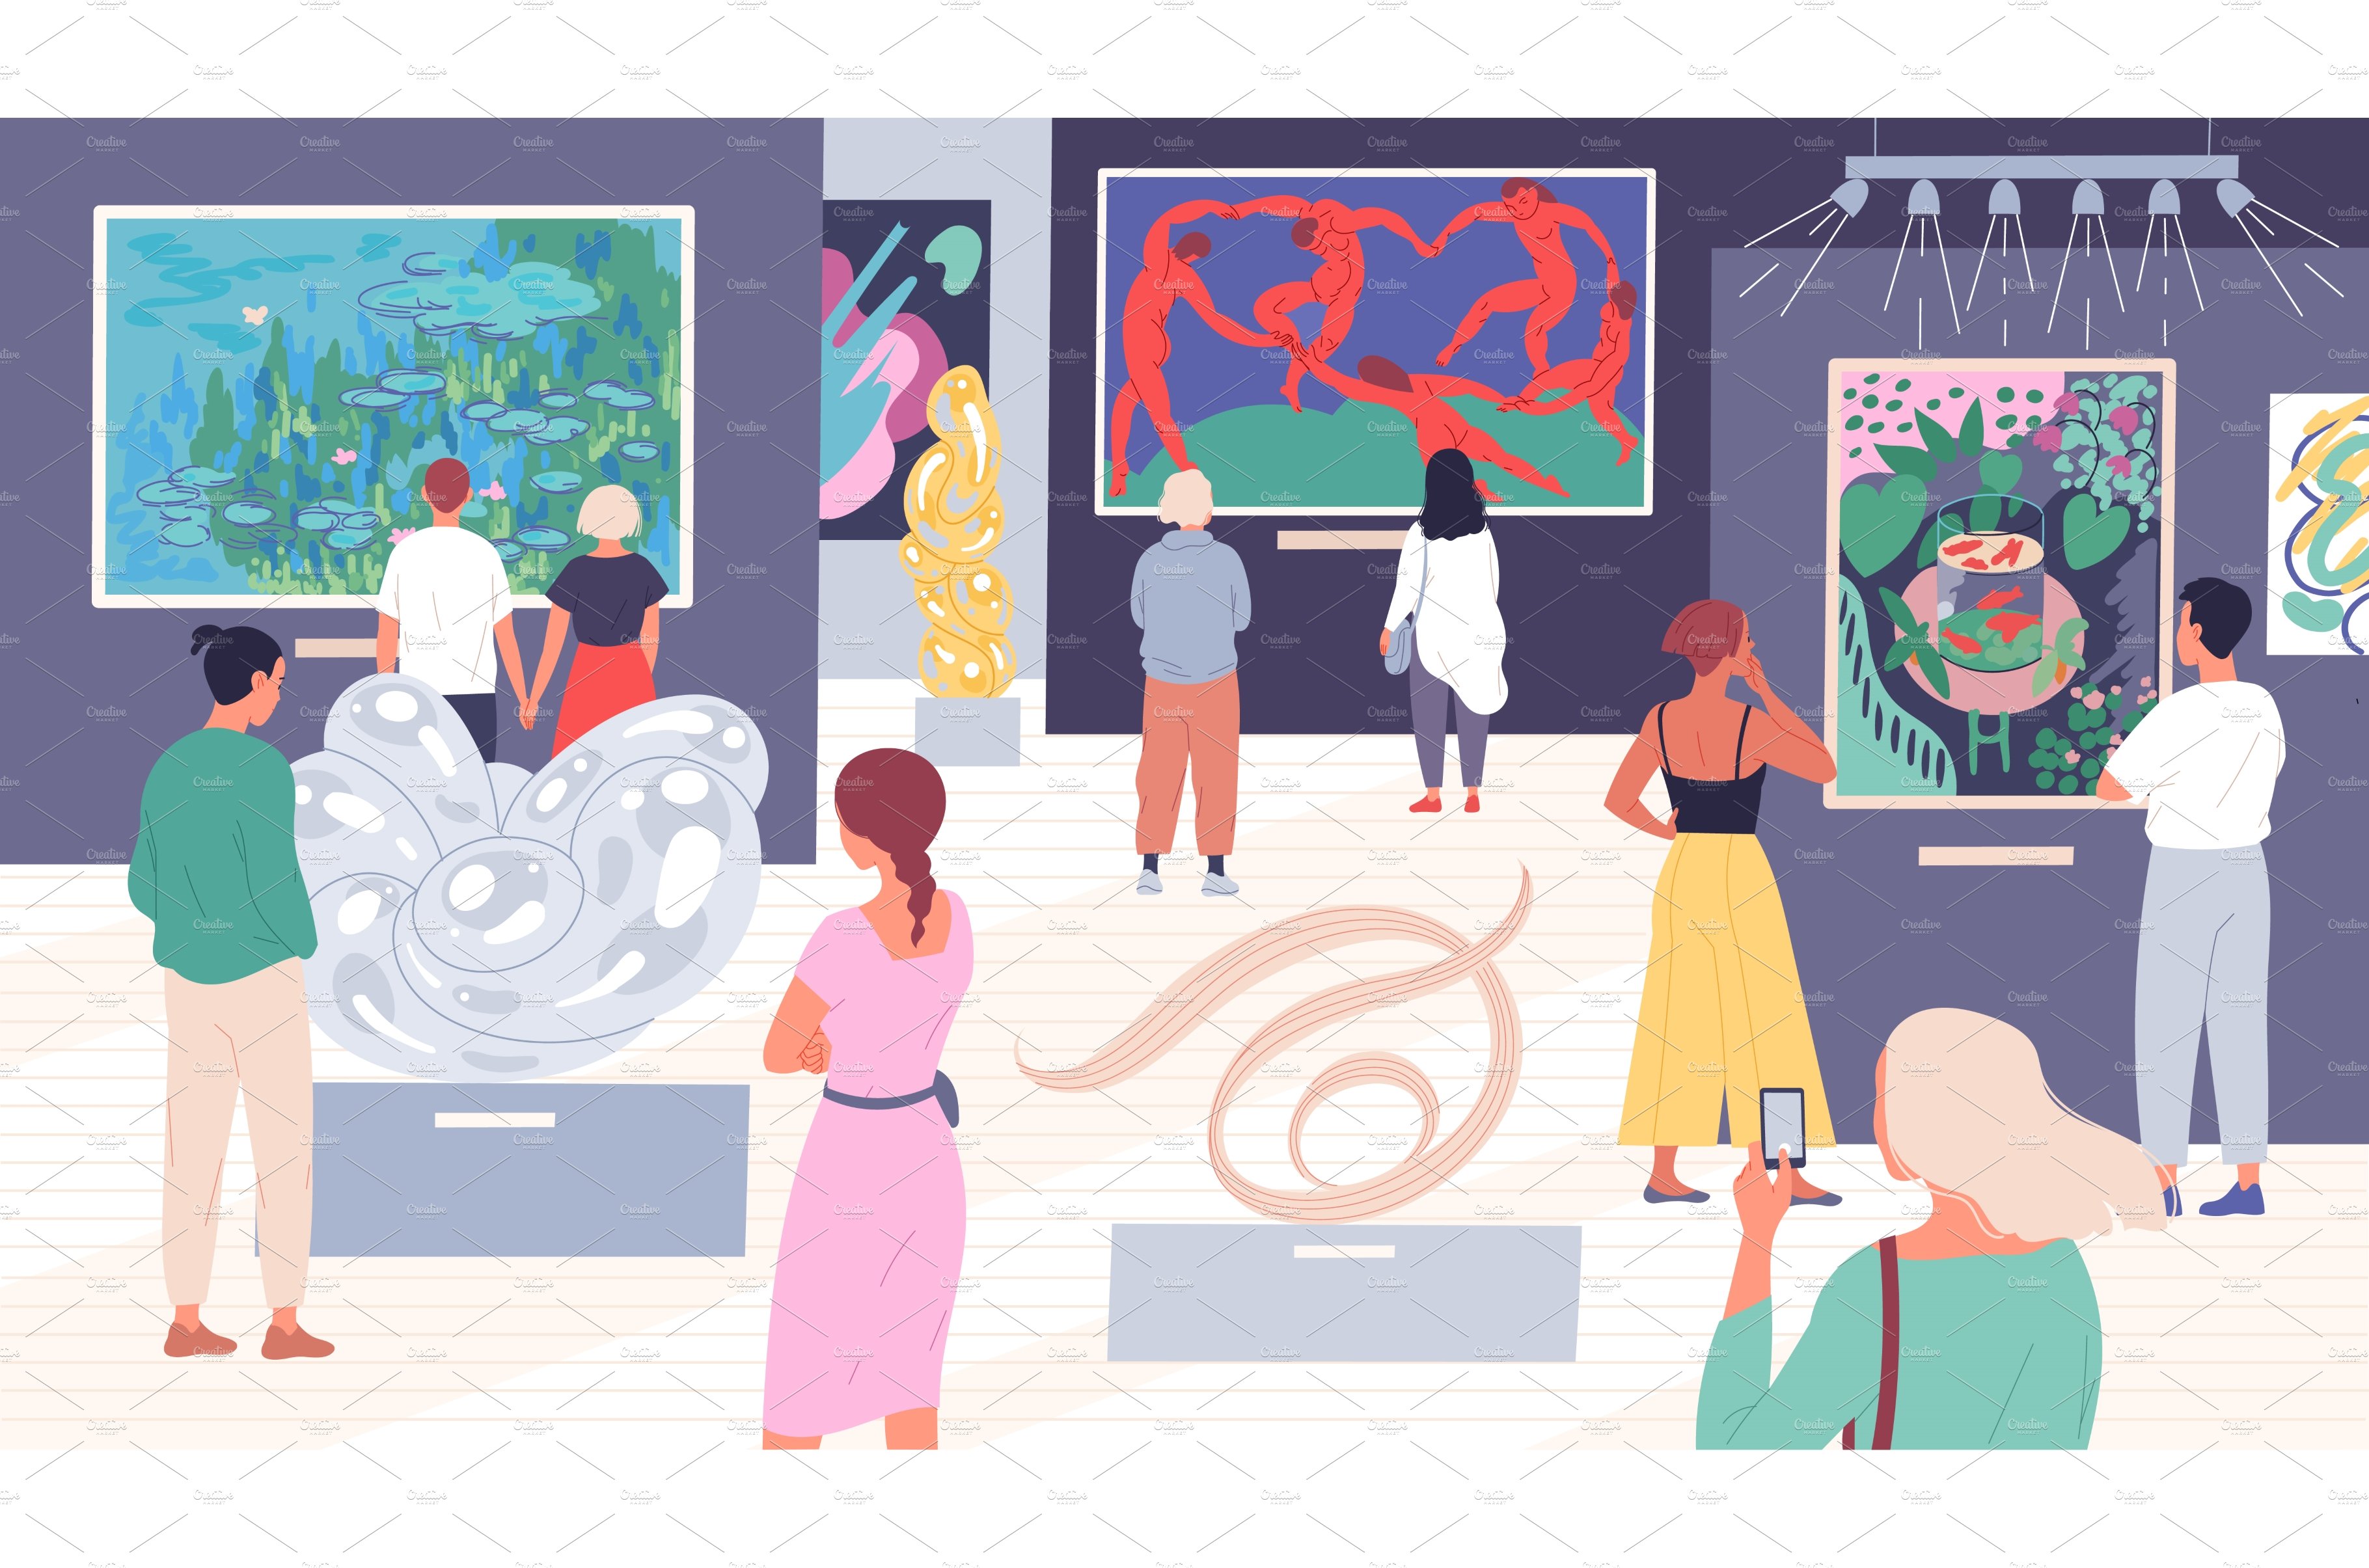 People on exhibition at the Museum cover image.